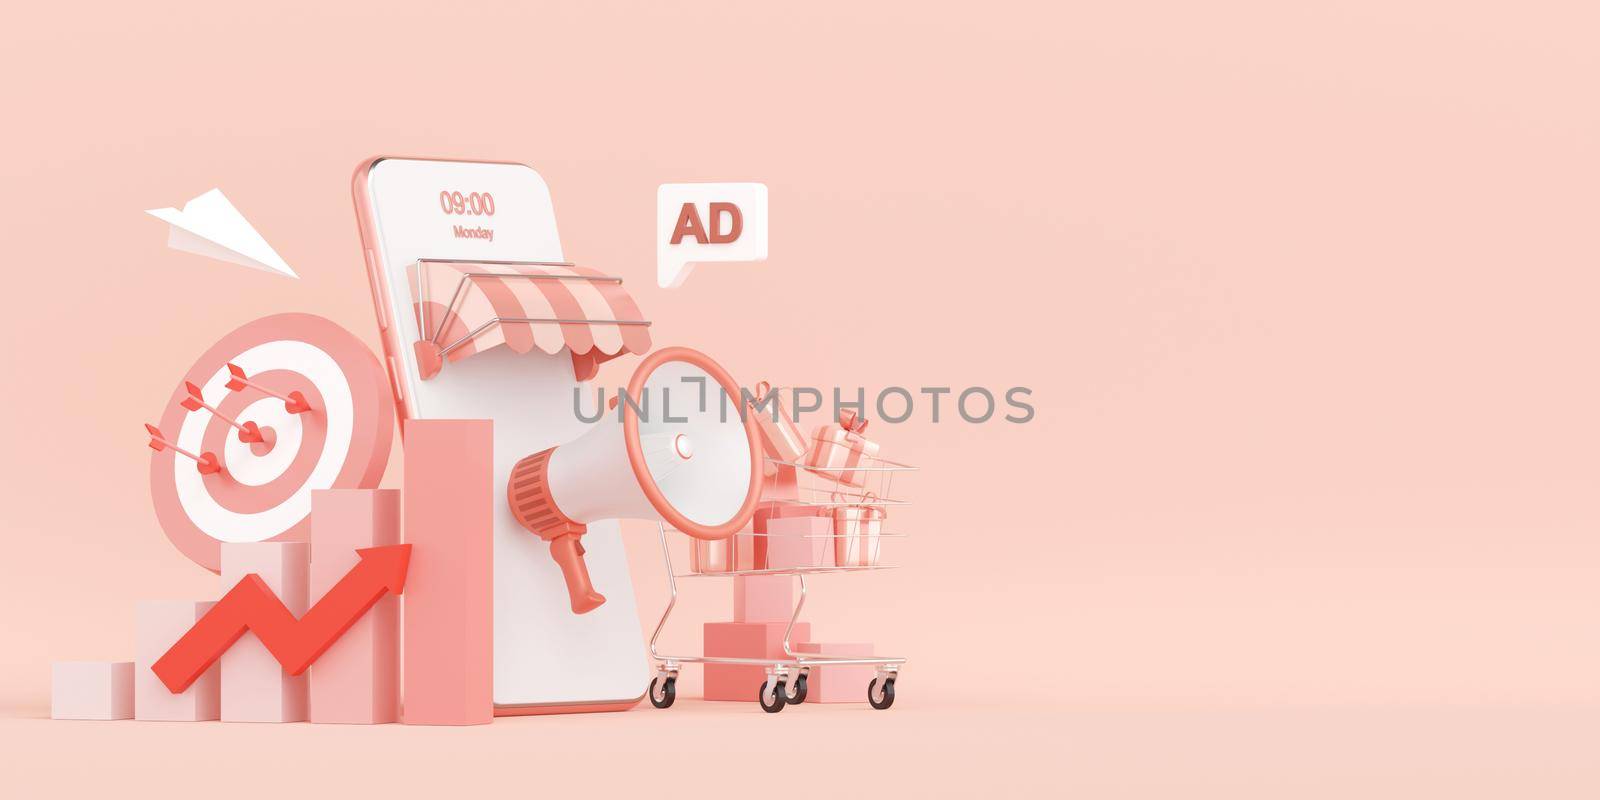 3d illustration of Shooting advertisements for online sales to be effective and targeted. by nutzchotwarut